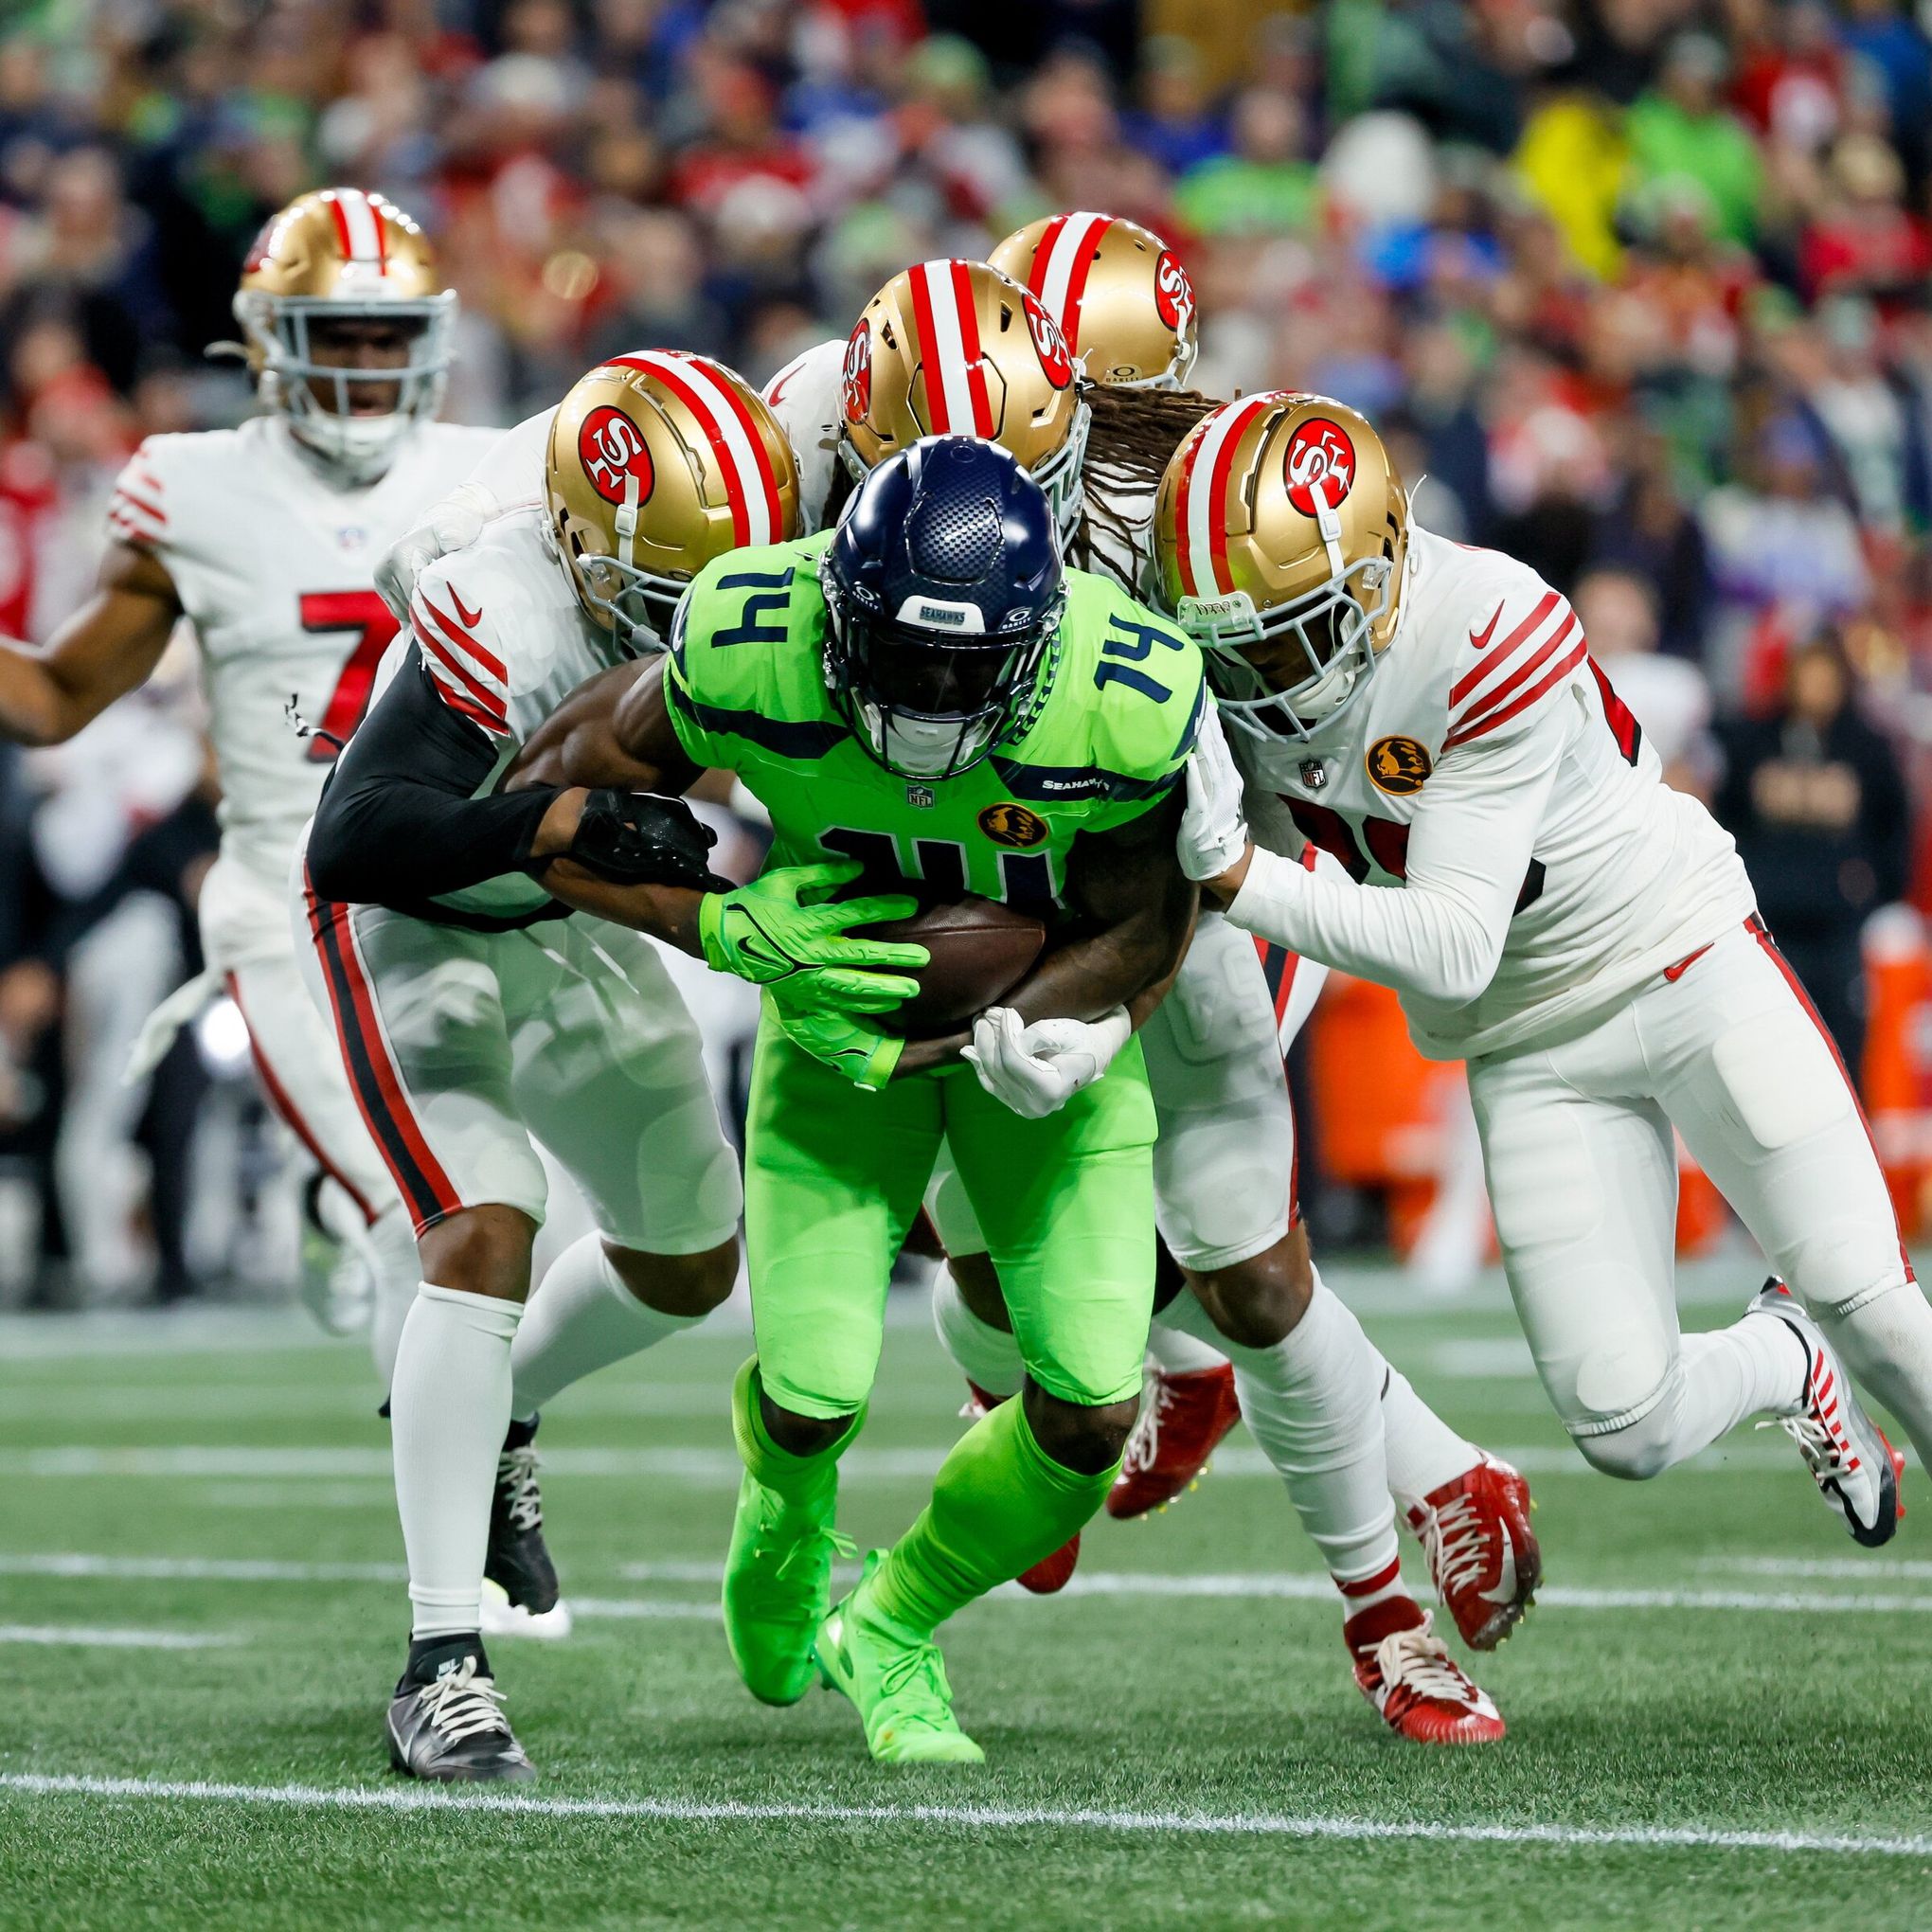 What to know about the Seahawks' Week 13 opponent, the Dallas